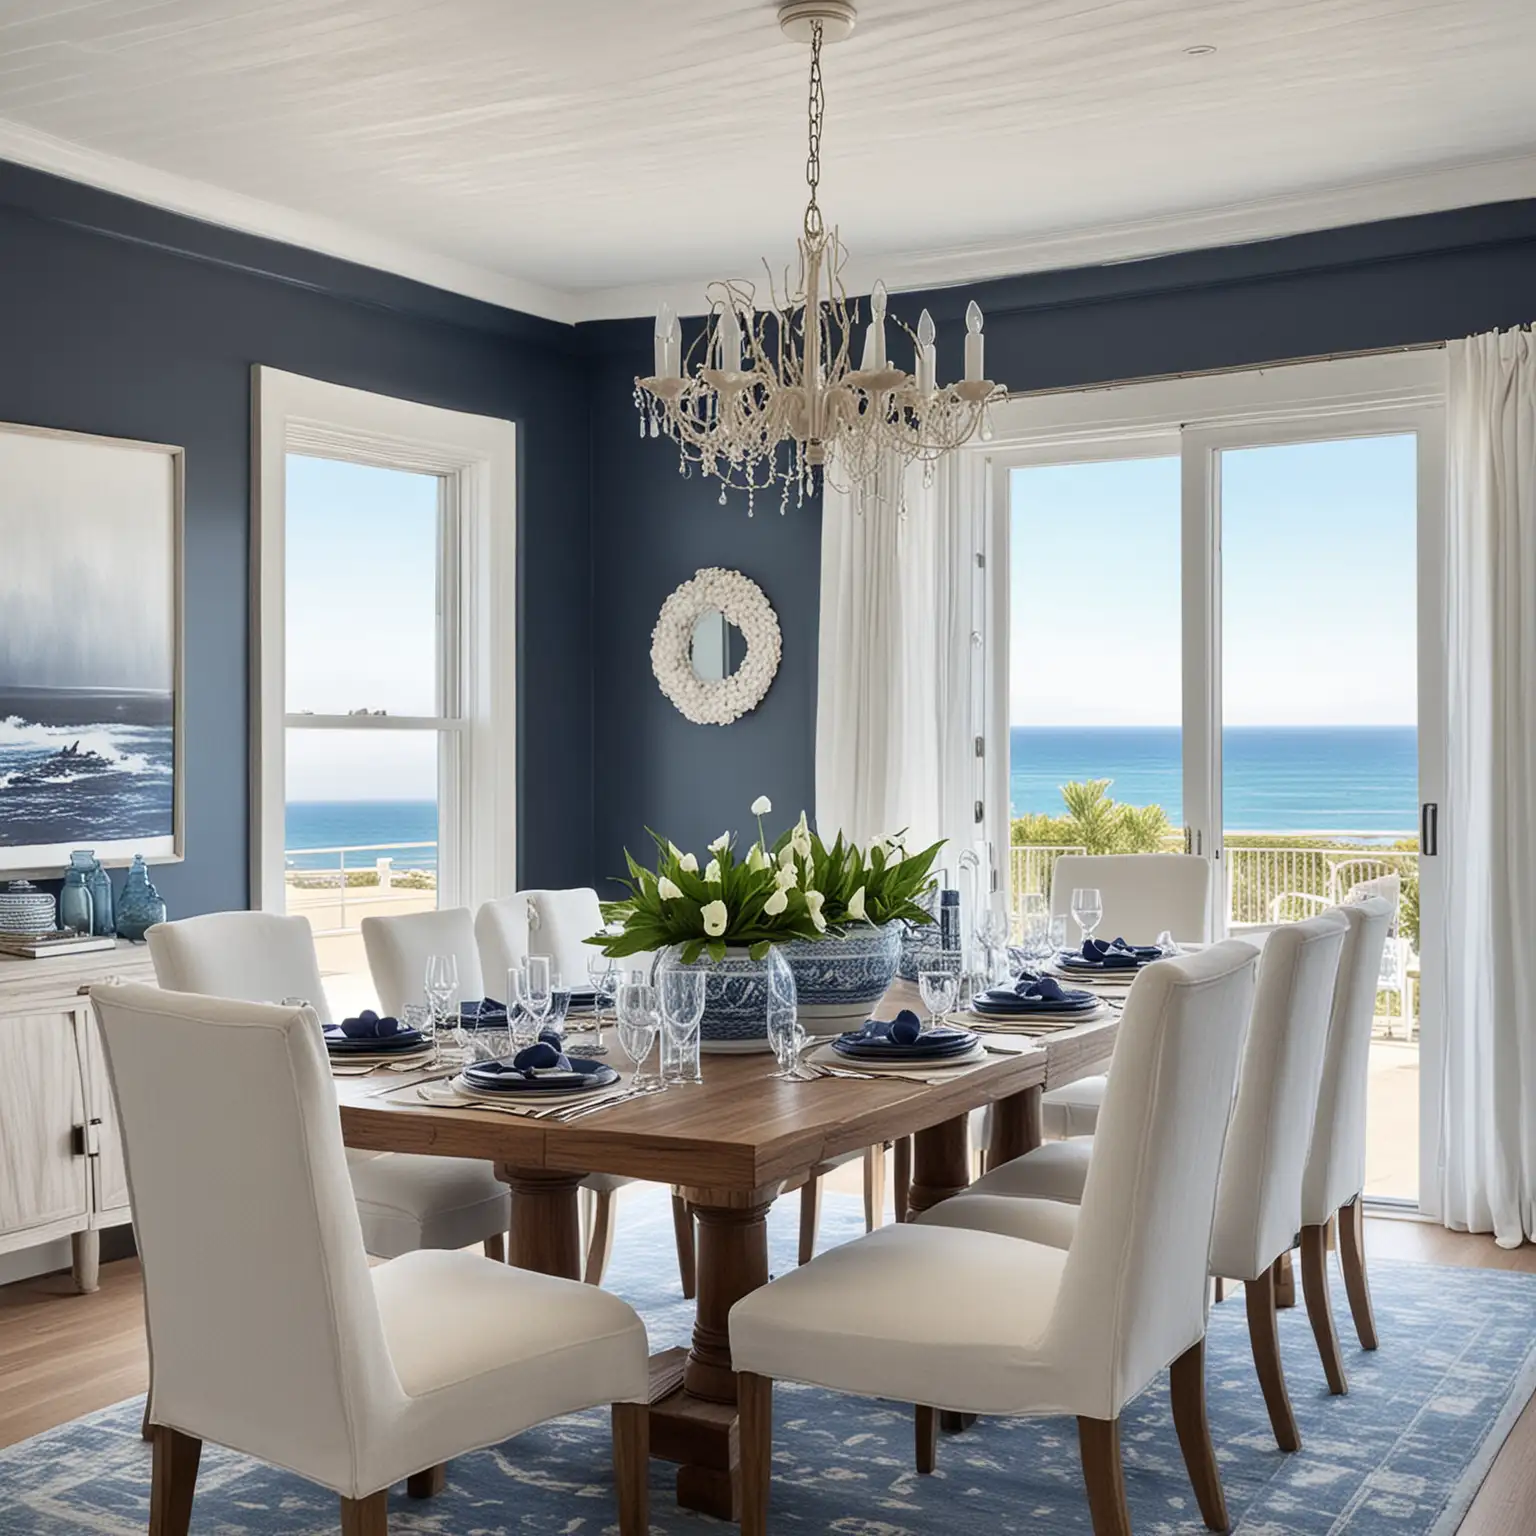 Navy and white coastal style dining room with ocean view